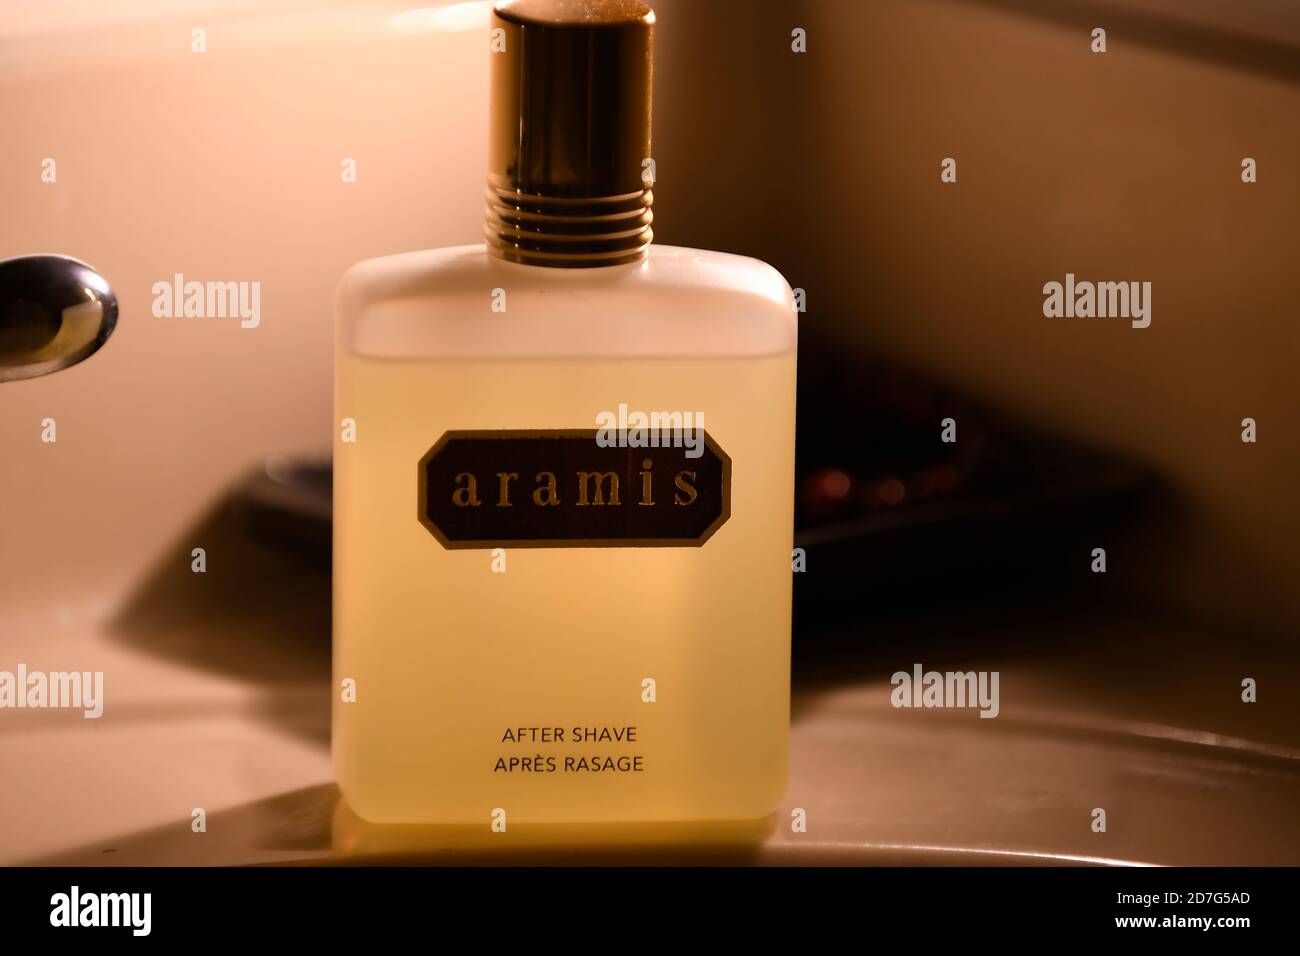 After Shave cologne on bathroom sink counter soap dish in background with  mood lighting Stock Photo - Alamy